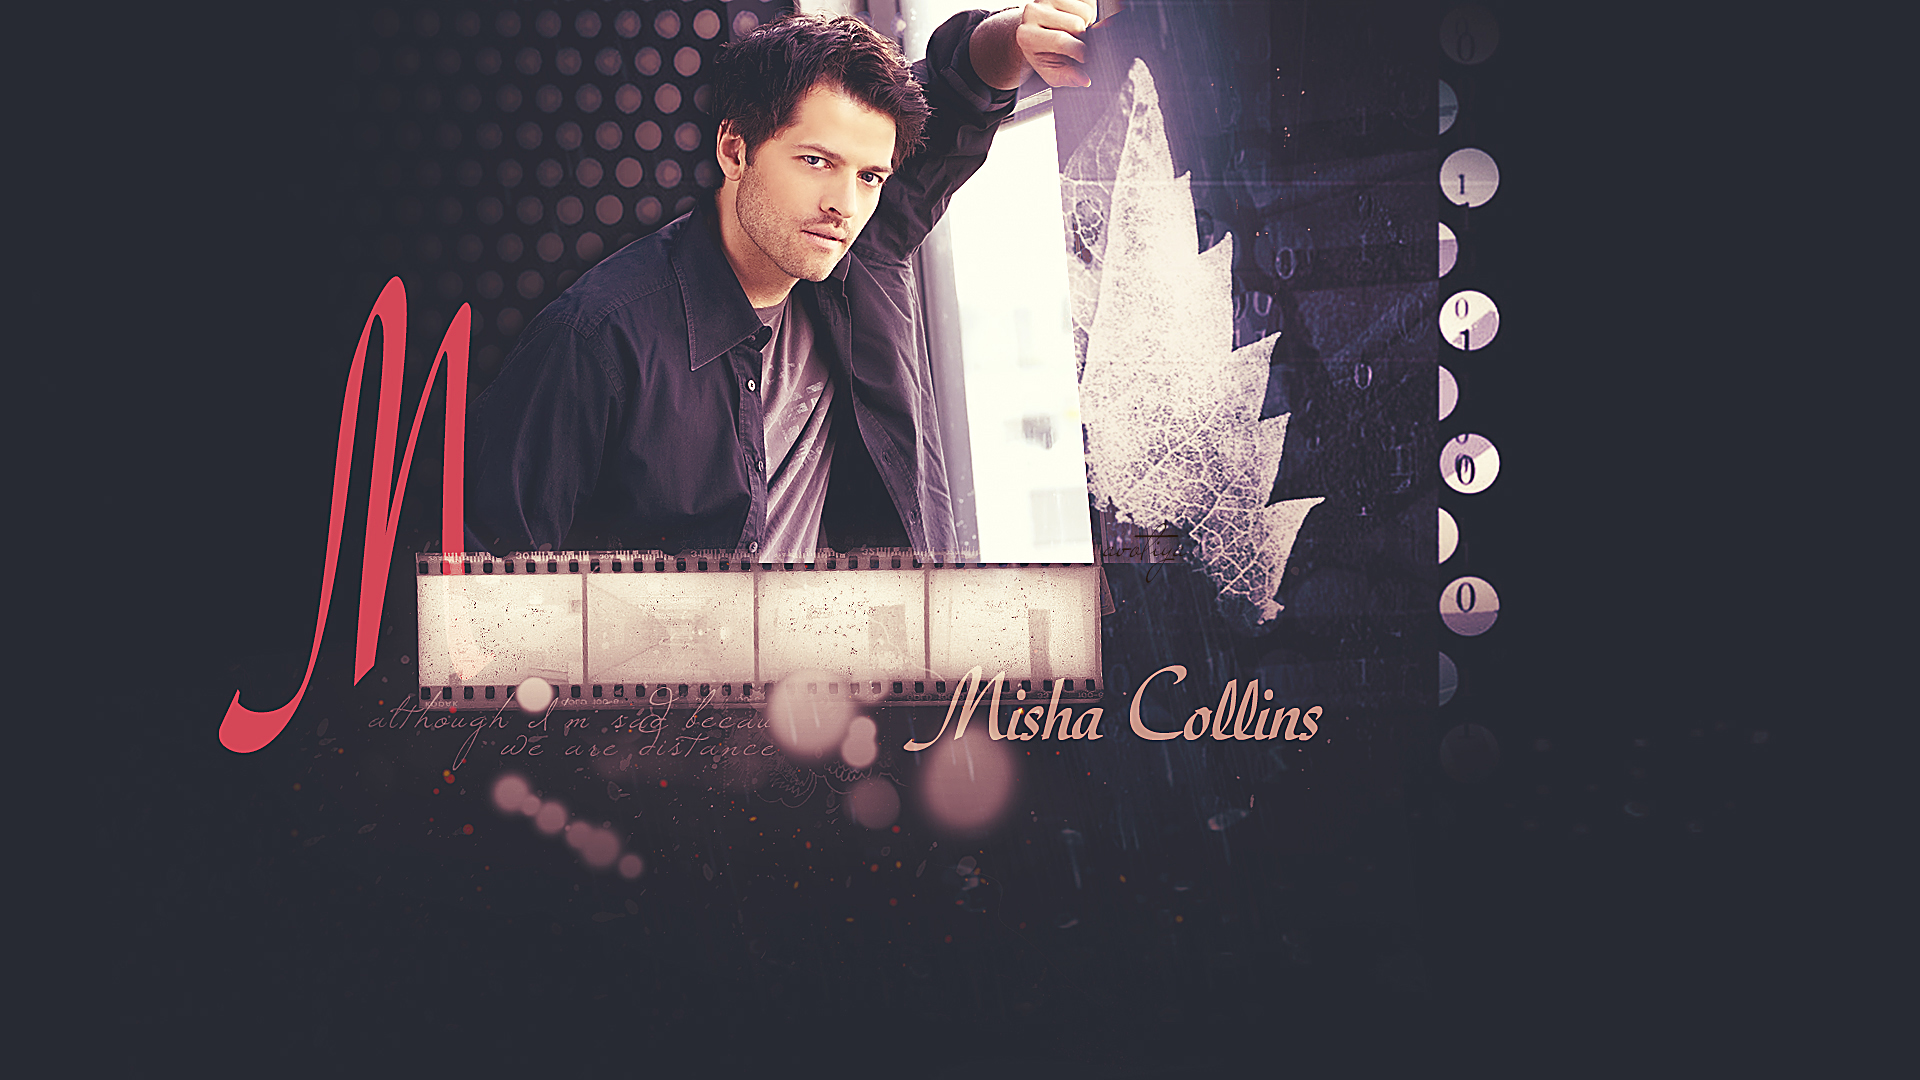 Misha Collins Wallpaper High Quality And Definition